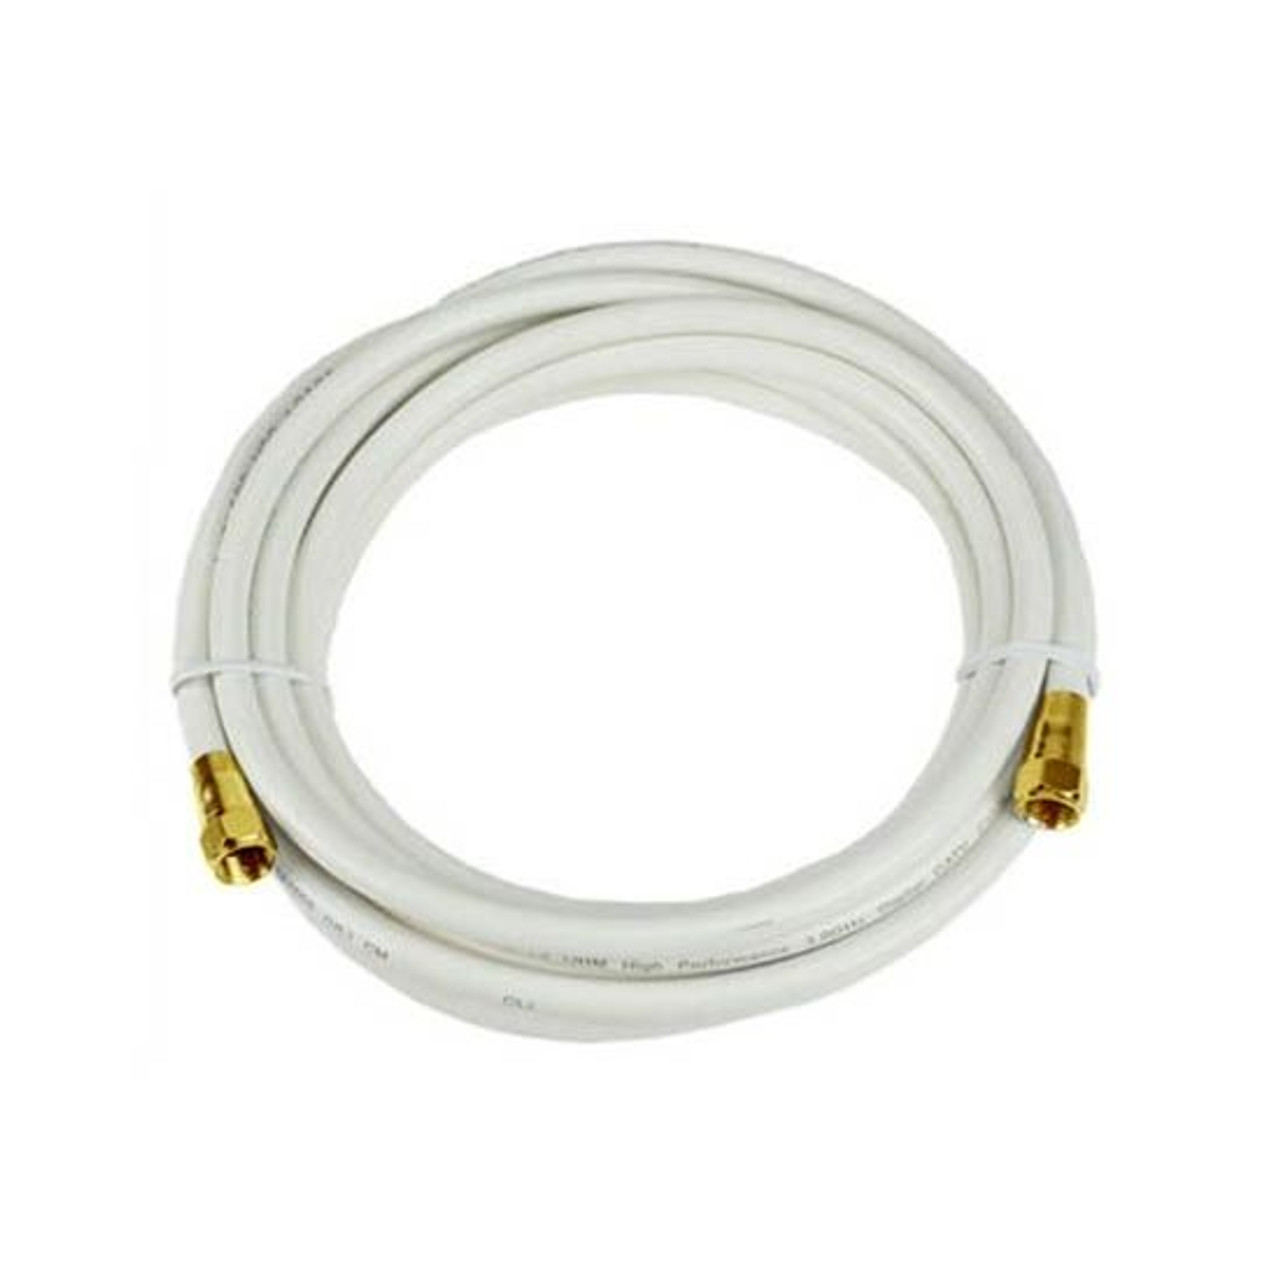 Steren 215-425WH 25 FT RG6 Coaxial Cable White with Gold F-Connector Each End 75 Ohm 3 GHz RG-6 RG6 Coax Cable Digital Satellite Dish TV Signal Distribution Line Video Jumper, Part # 215425-WH